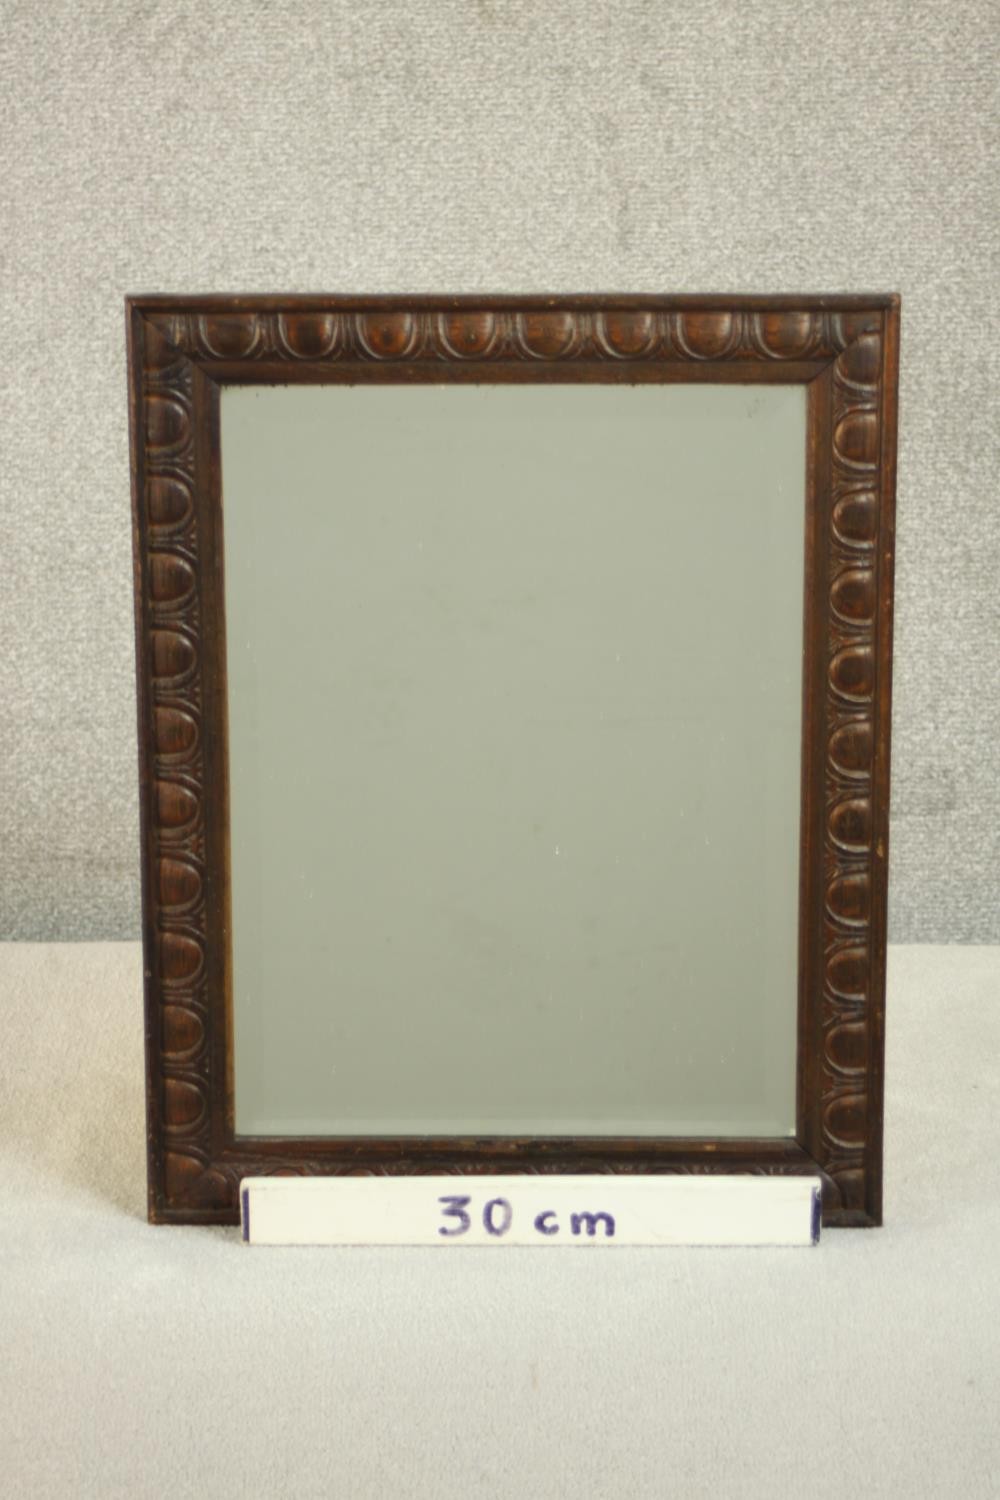 An early 20th century rectangular oak wall mirror, the frame carved with an egg and dart type - Image 2 of 5